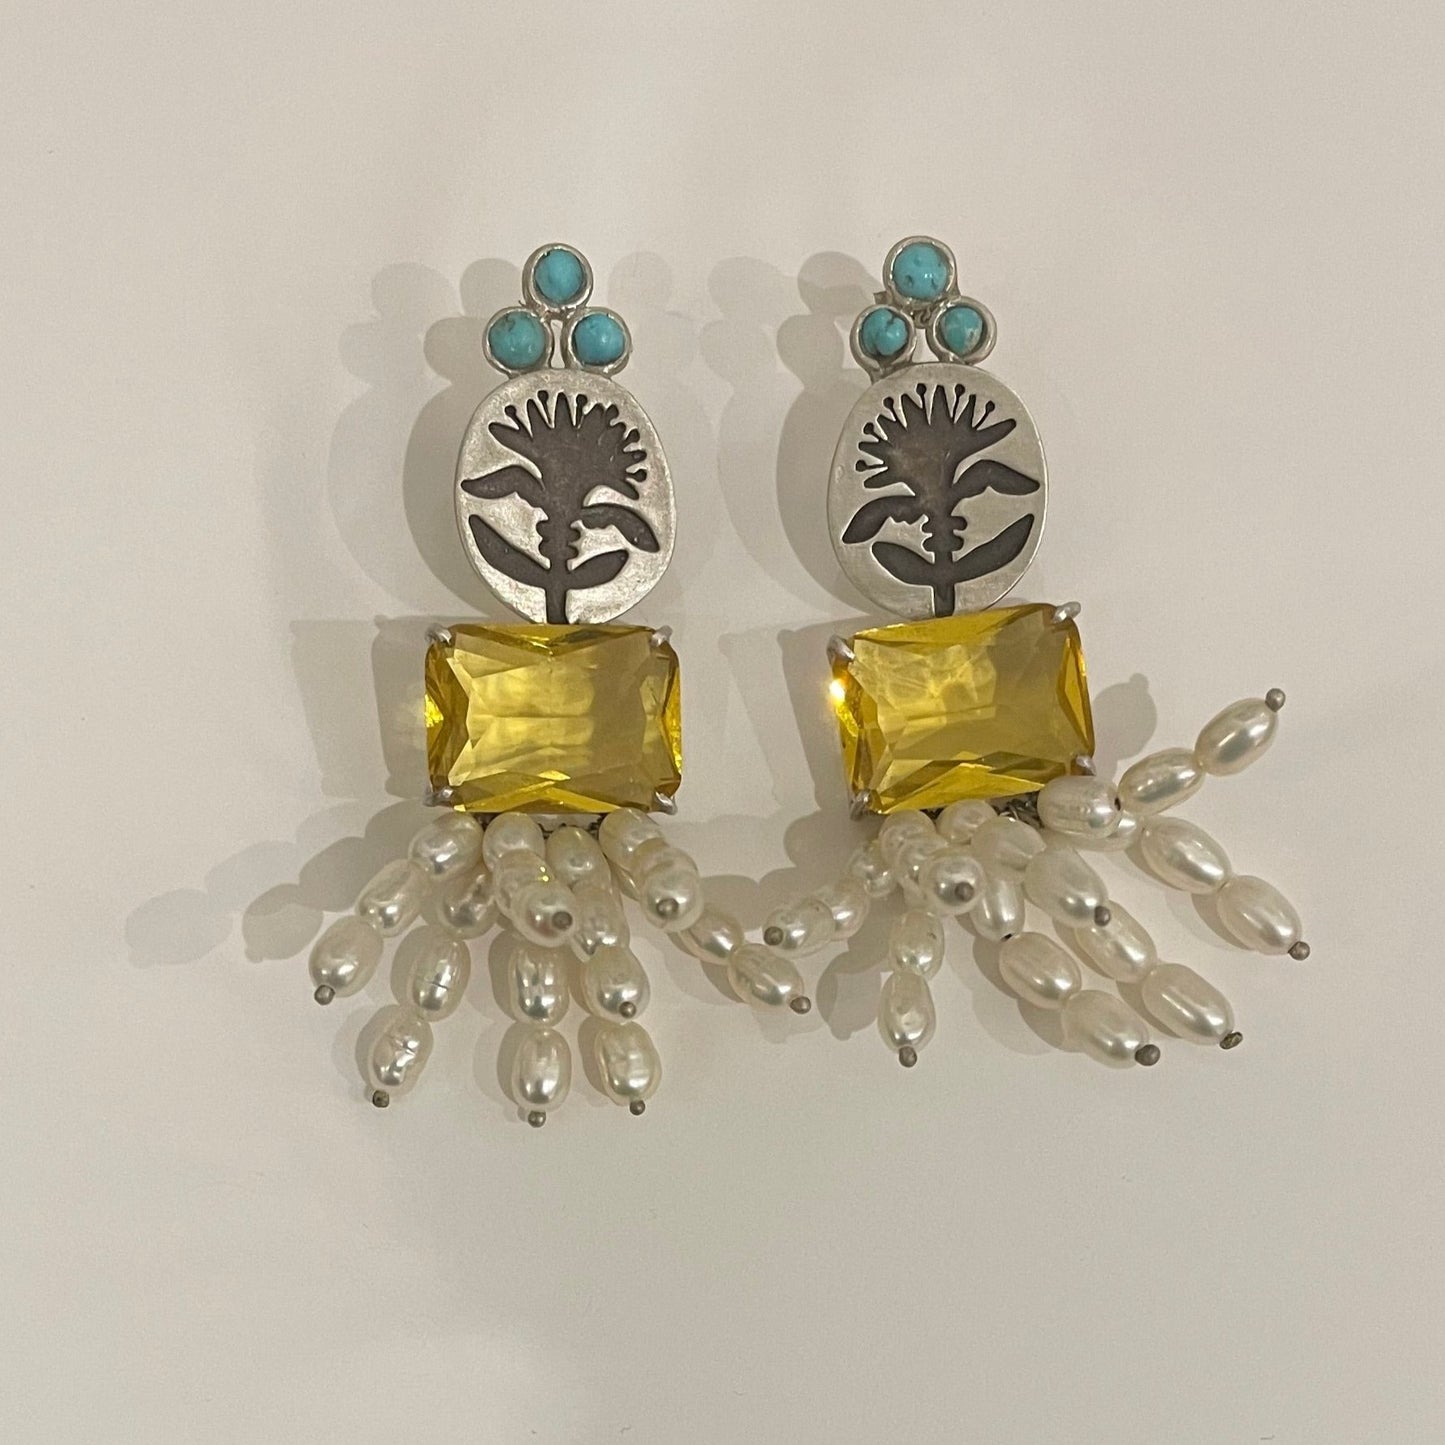 Silver earrings with three round turquoises on the top, and square yellow crystal and Pearls on the bottom.